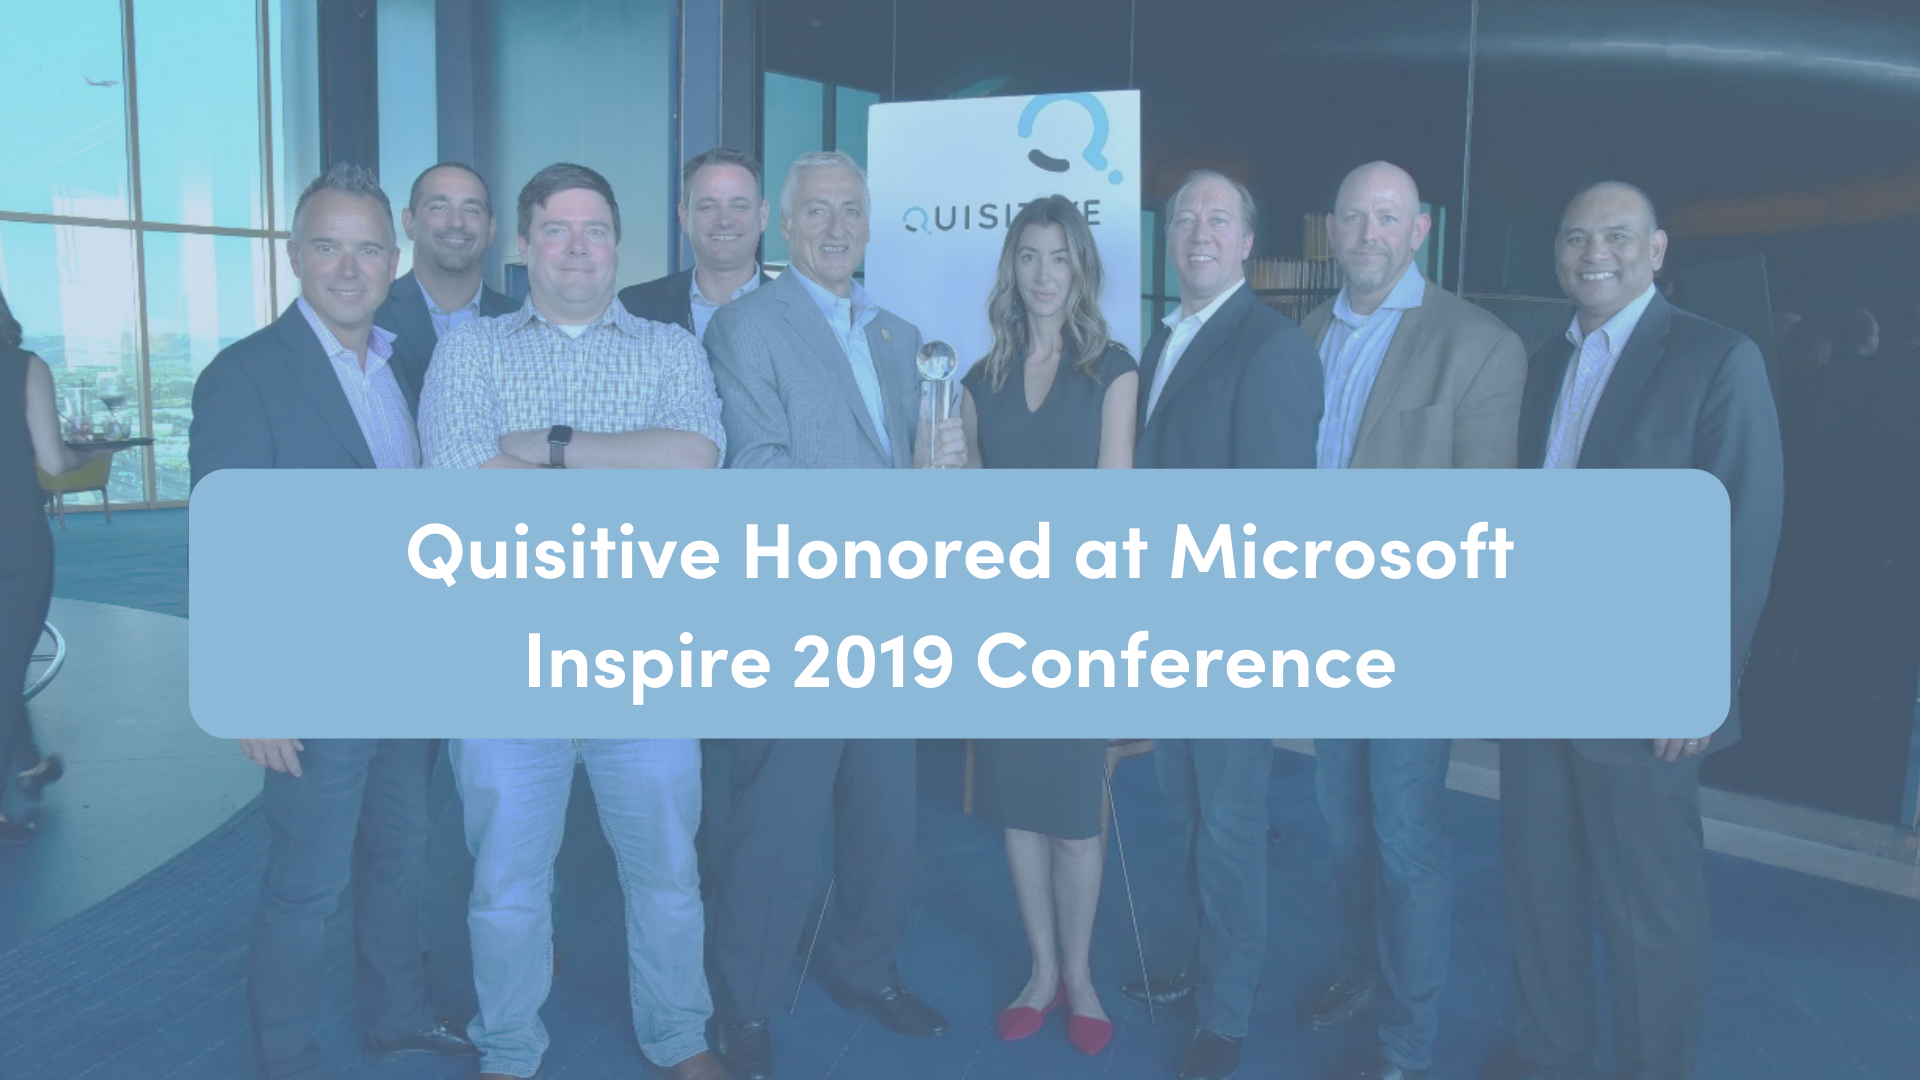 Several people in corporate dress standing around a crystal award with text Quisitive Honored at Microsoft Inspire 2019 Conference